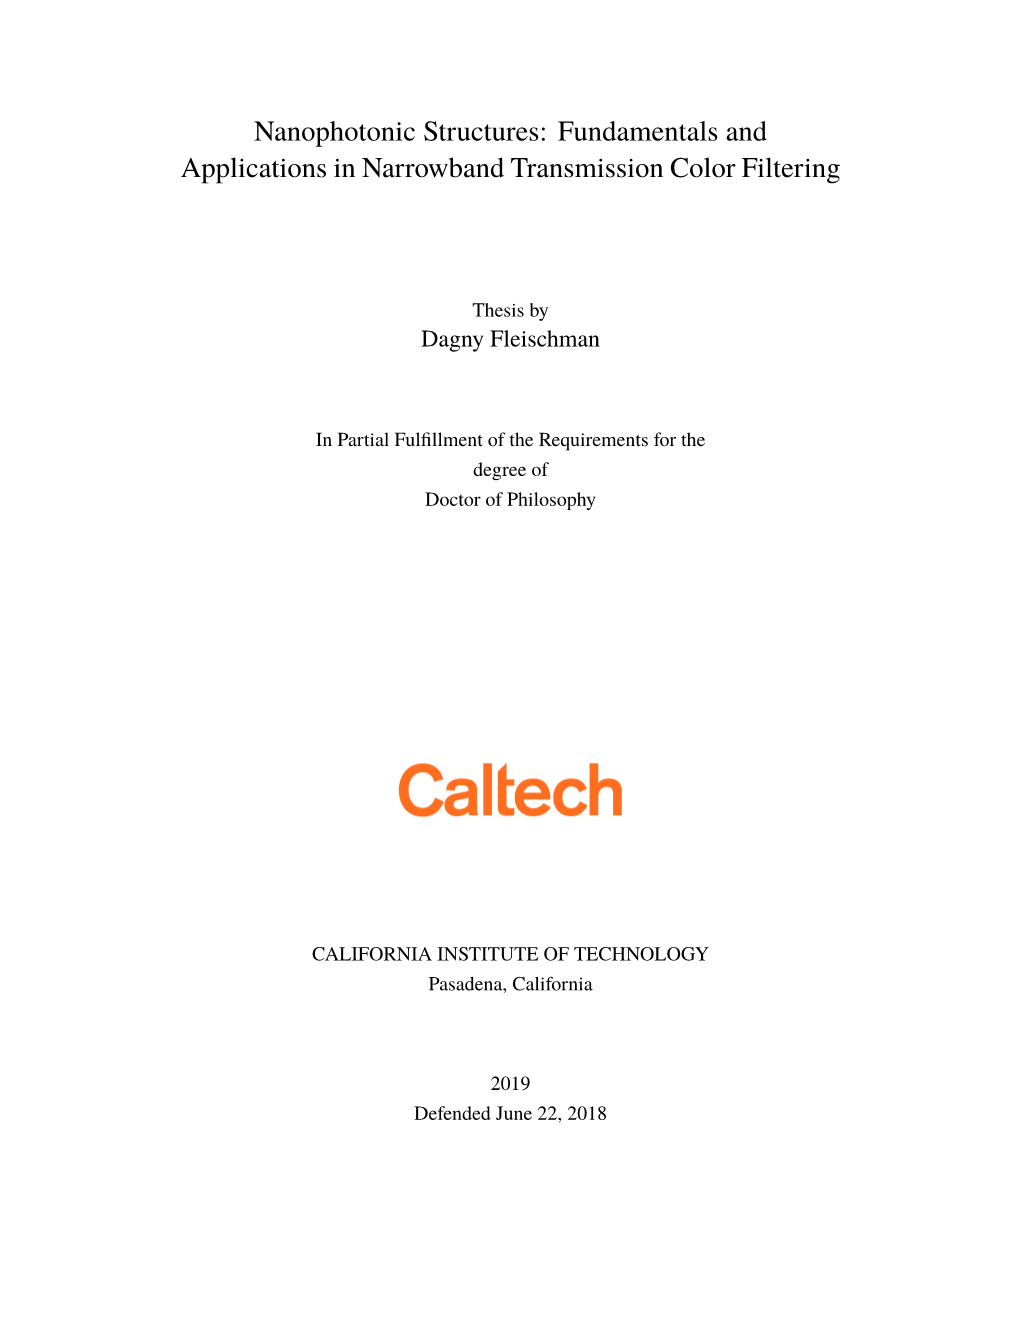 Fundamentals and Applications in Narrowband Transmission Color Filtering